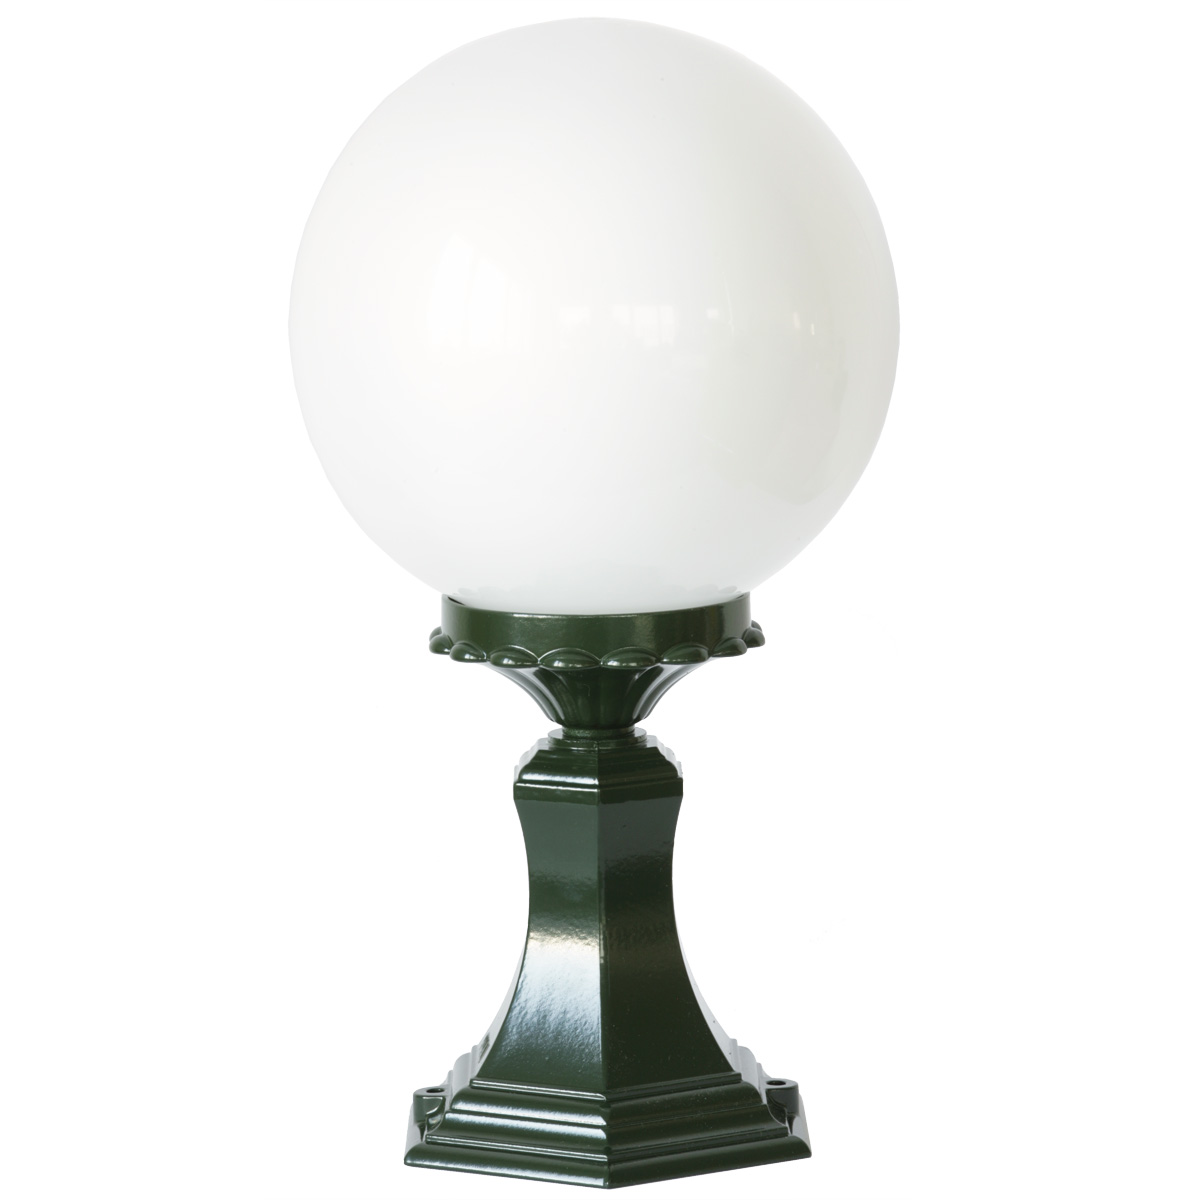 Globe Lamp for Outdoors with Acrylic Glass Ball